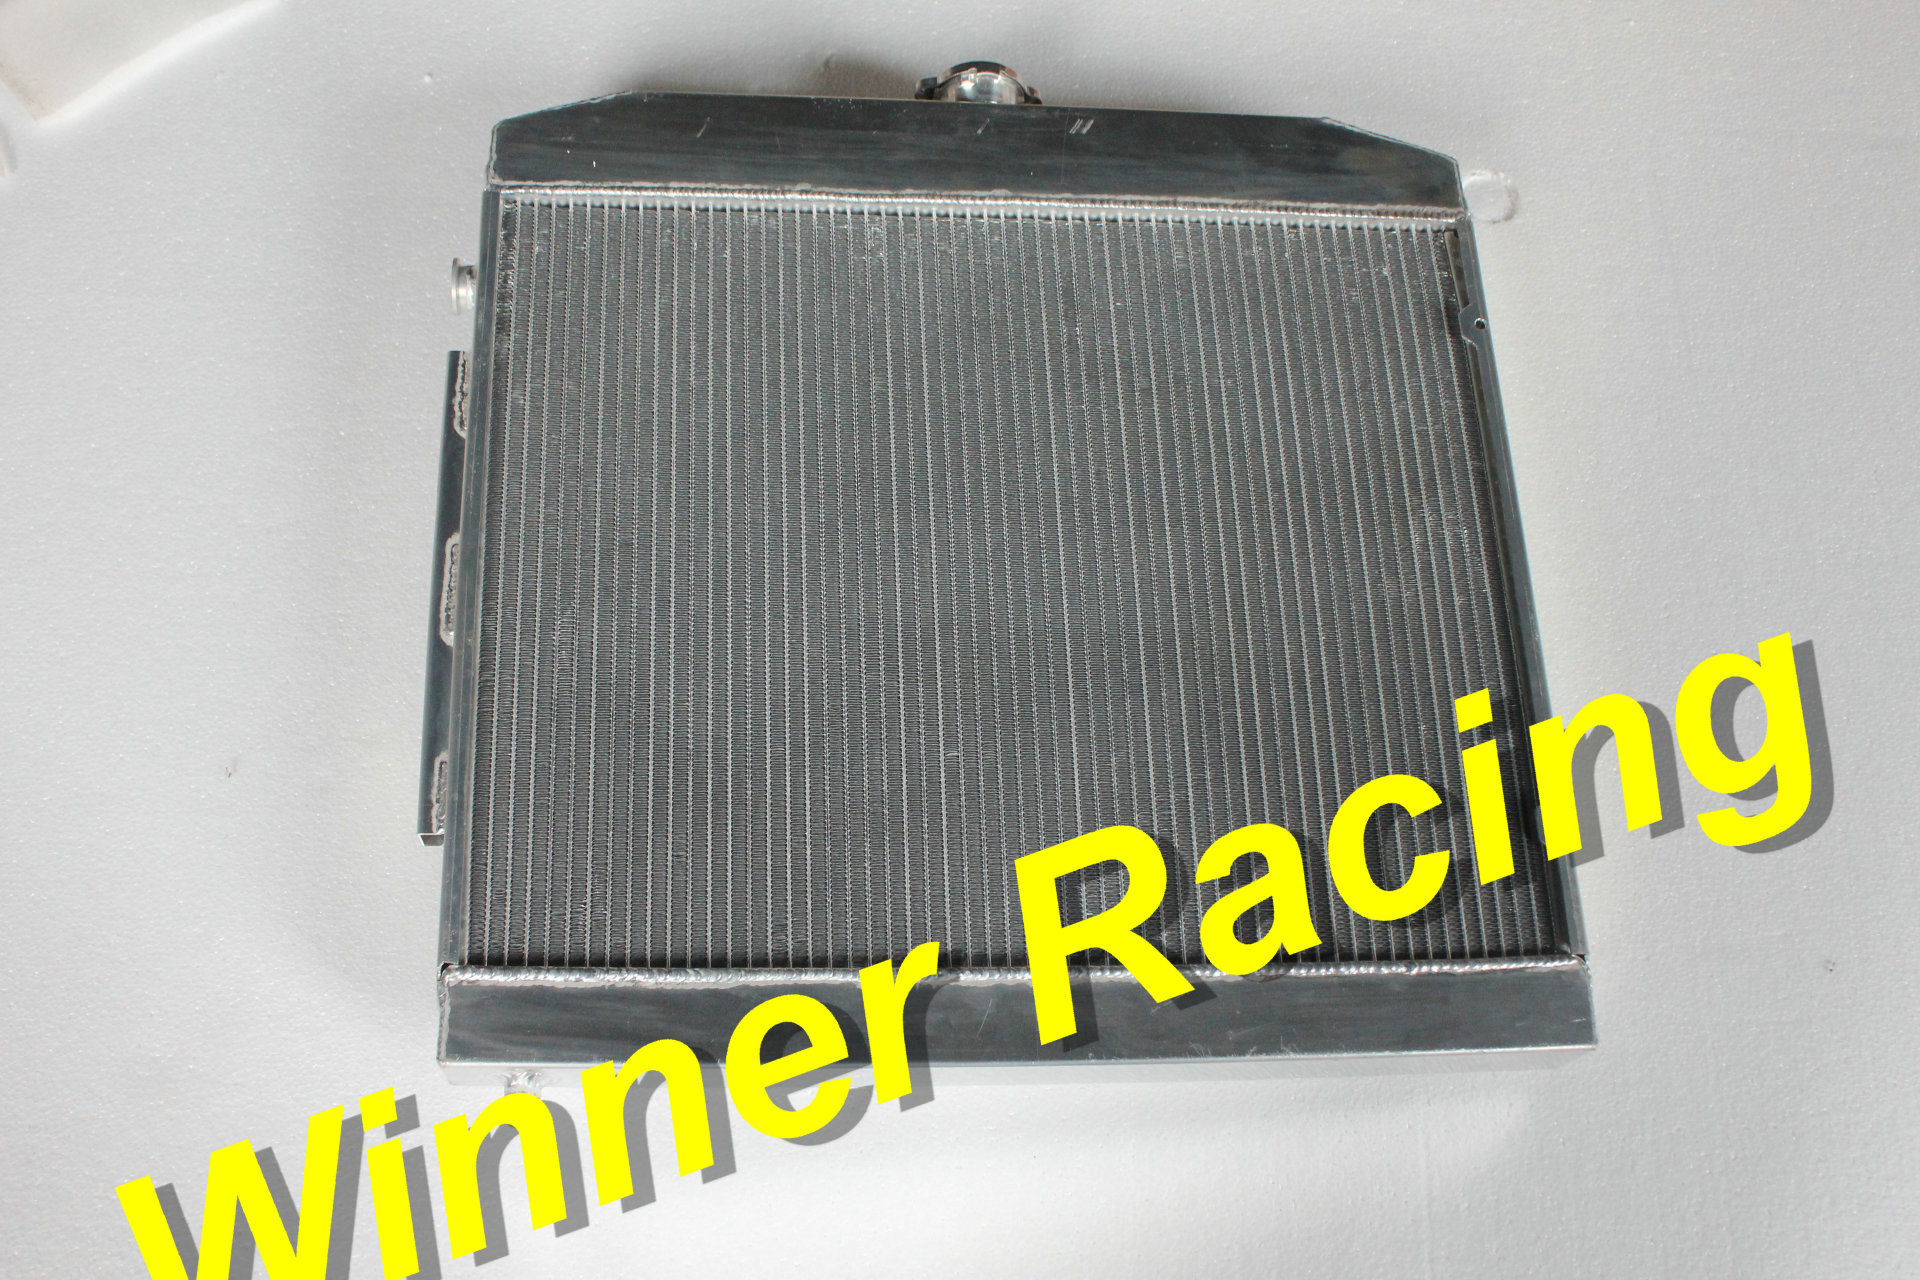 ALUMINUM RADIATOR FOR Mercedes Benz CLASS W108 W109 300 COUPE W 111 280 1968-1972